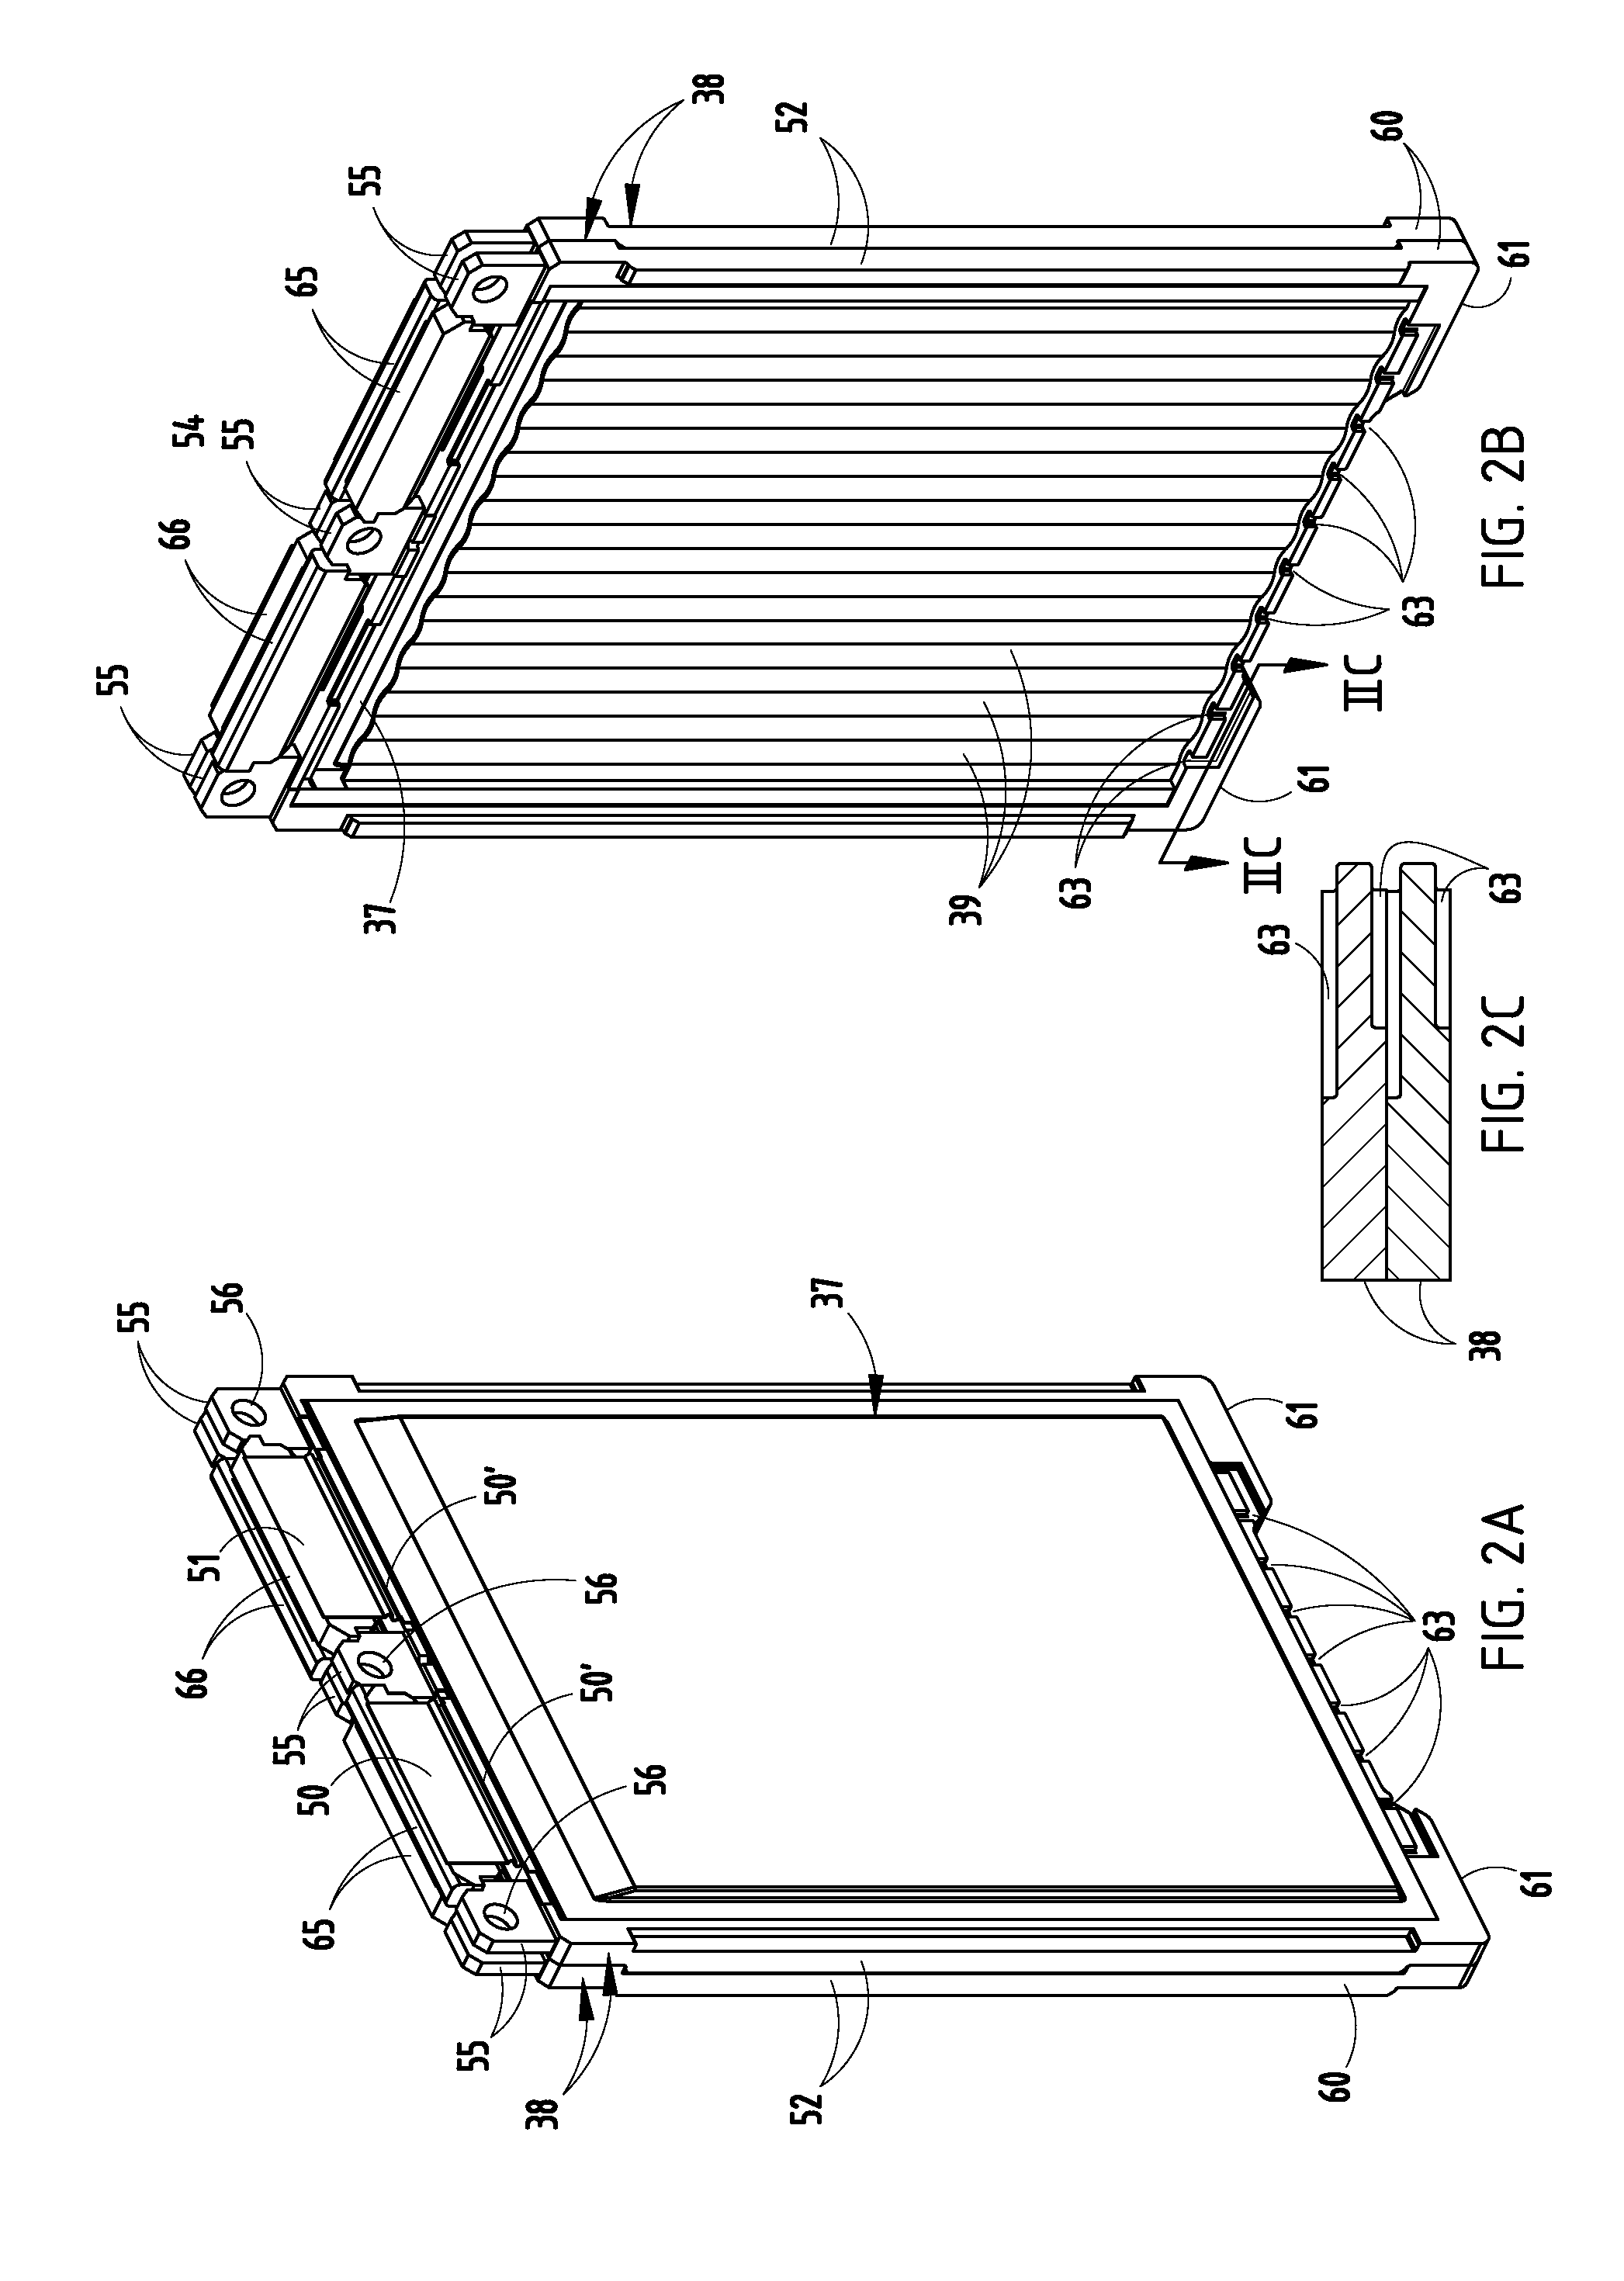 Temperature-controlled battery configuration